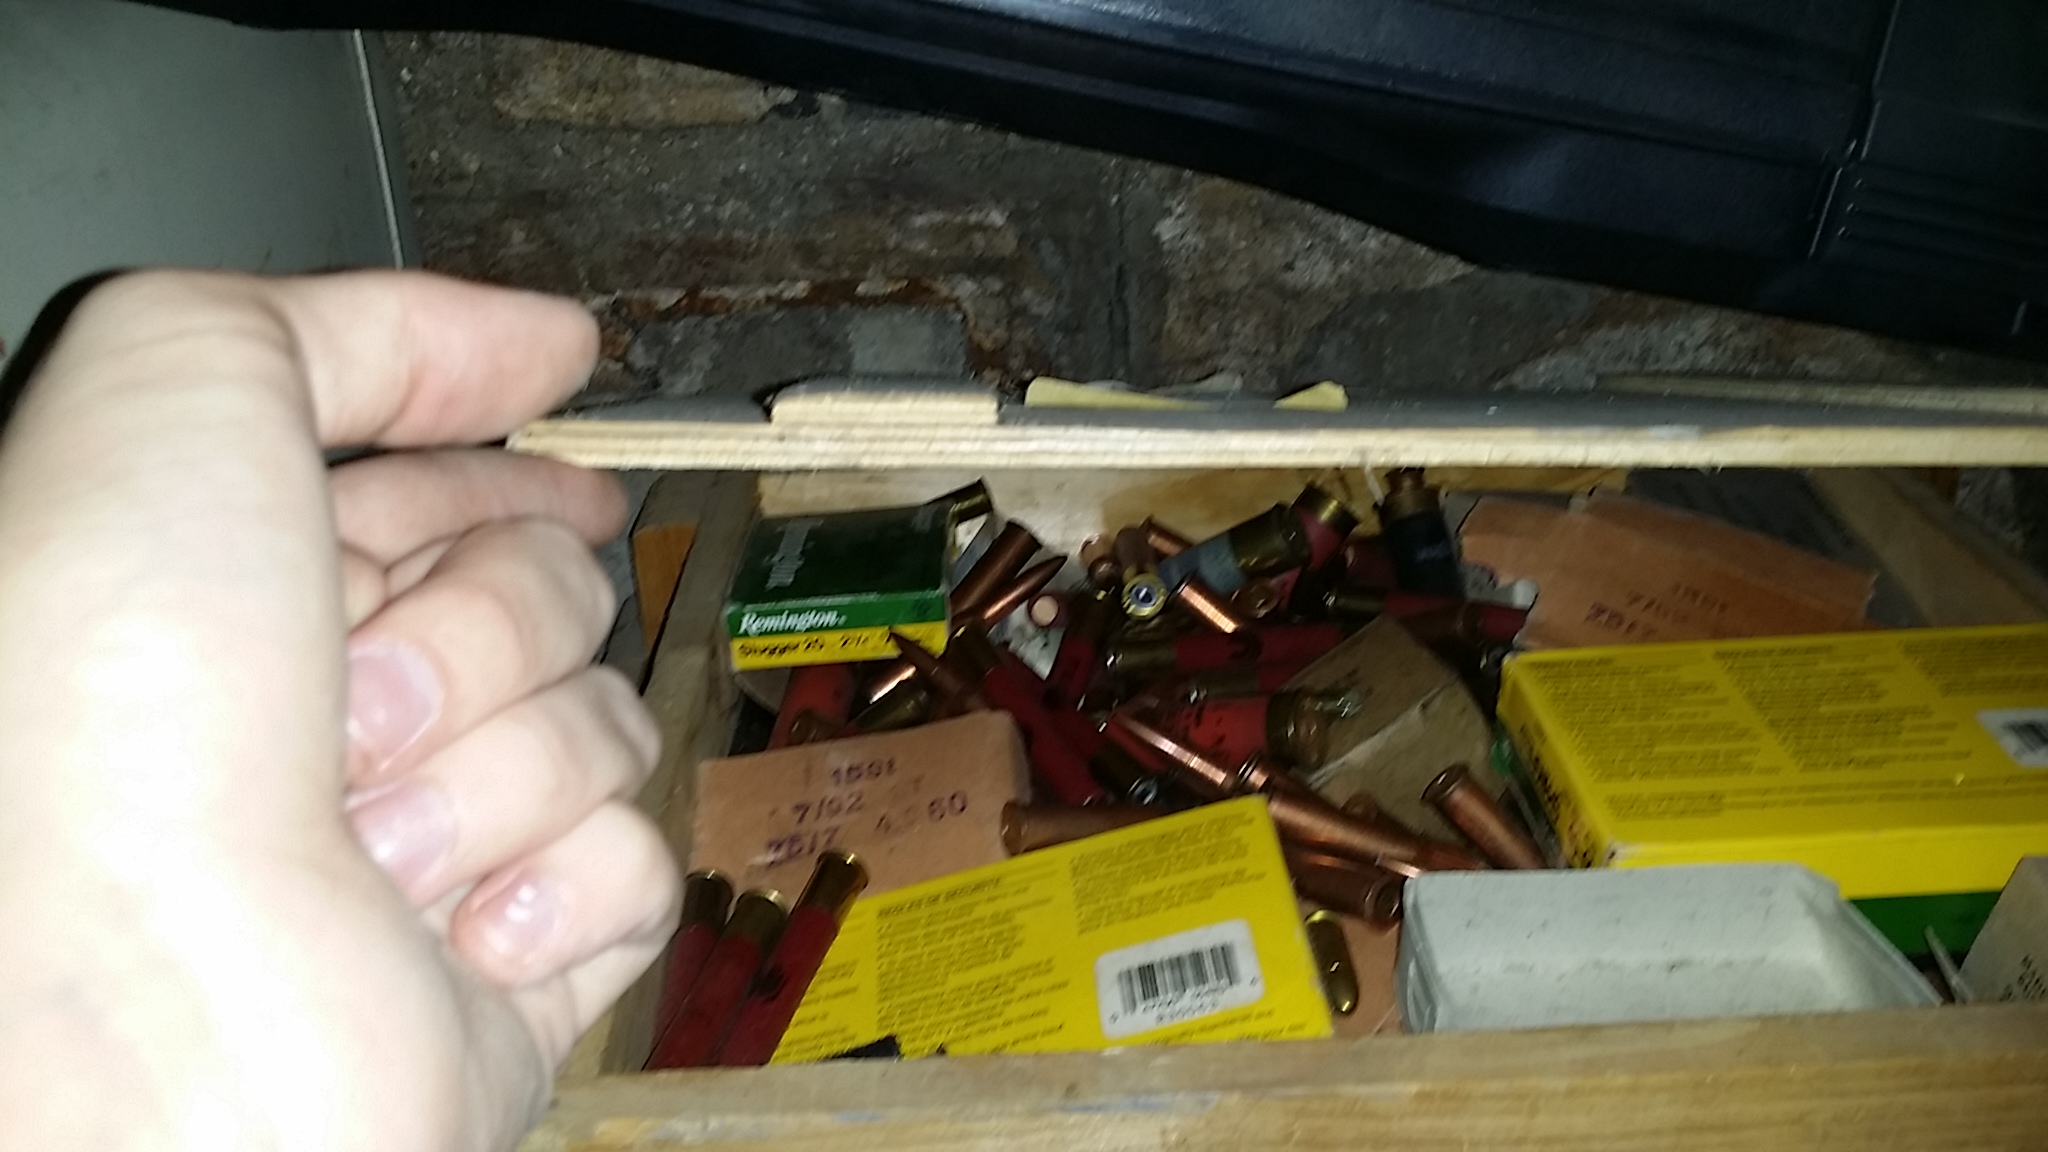 There was an assortment of different kinds of ammo in this wooden box as well.